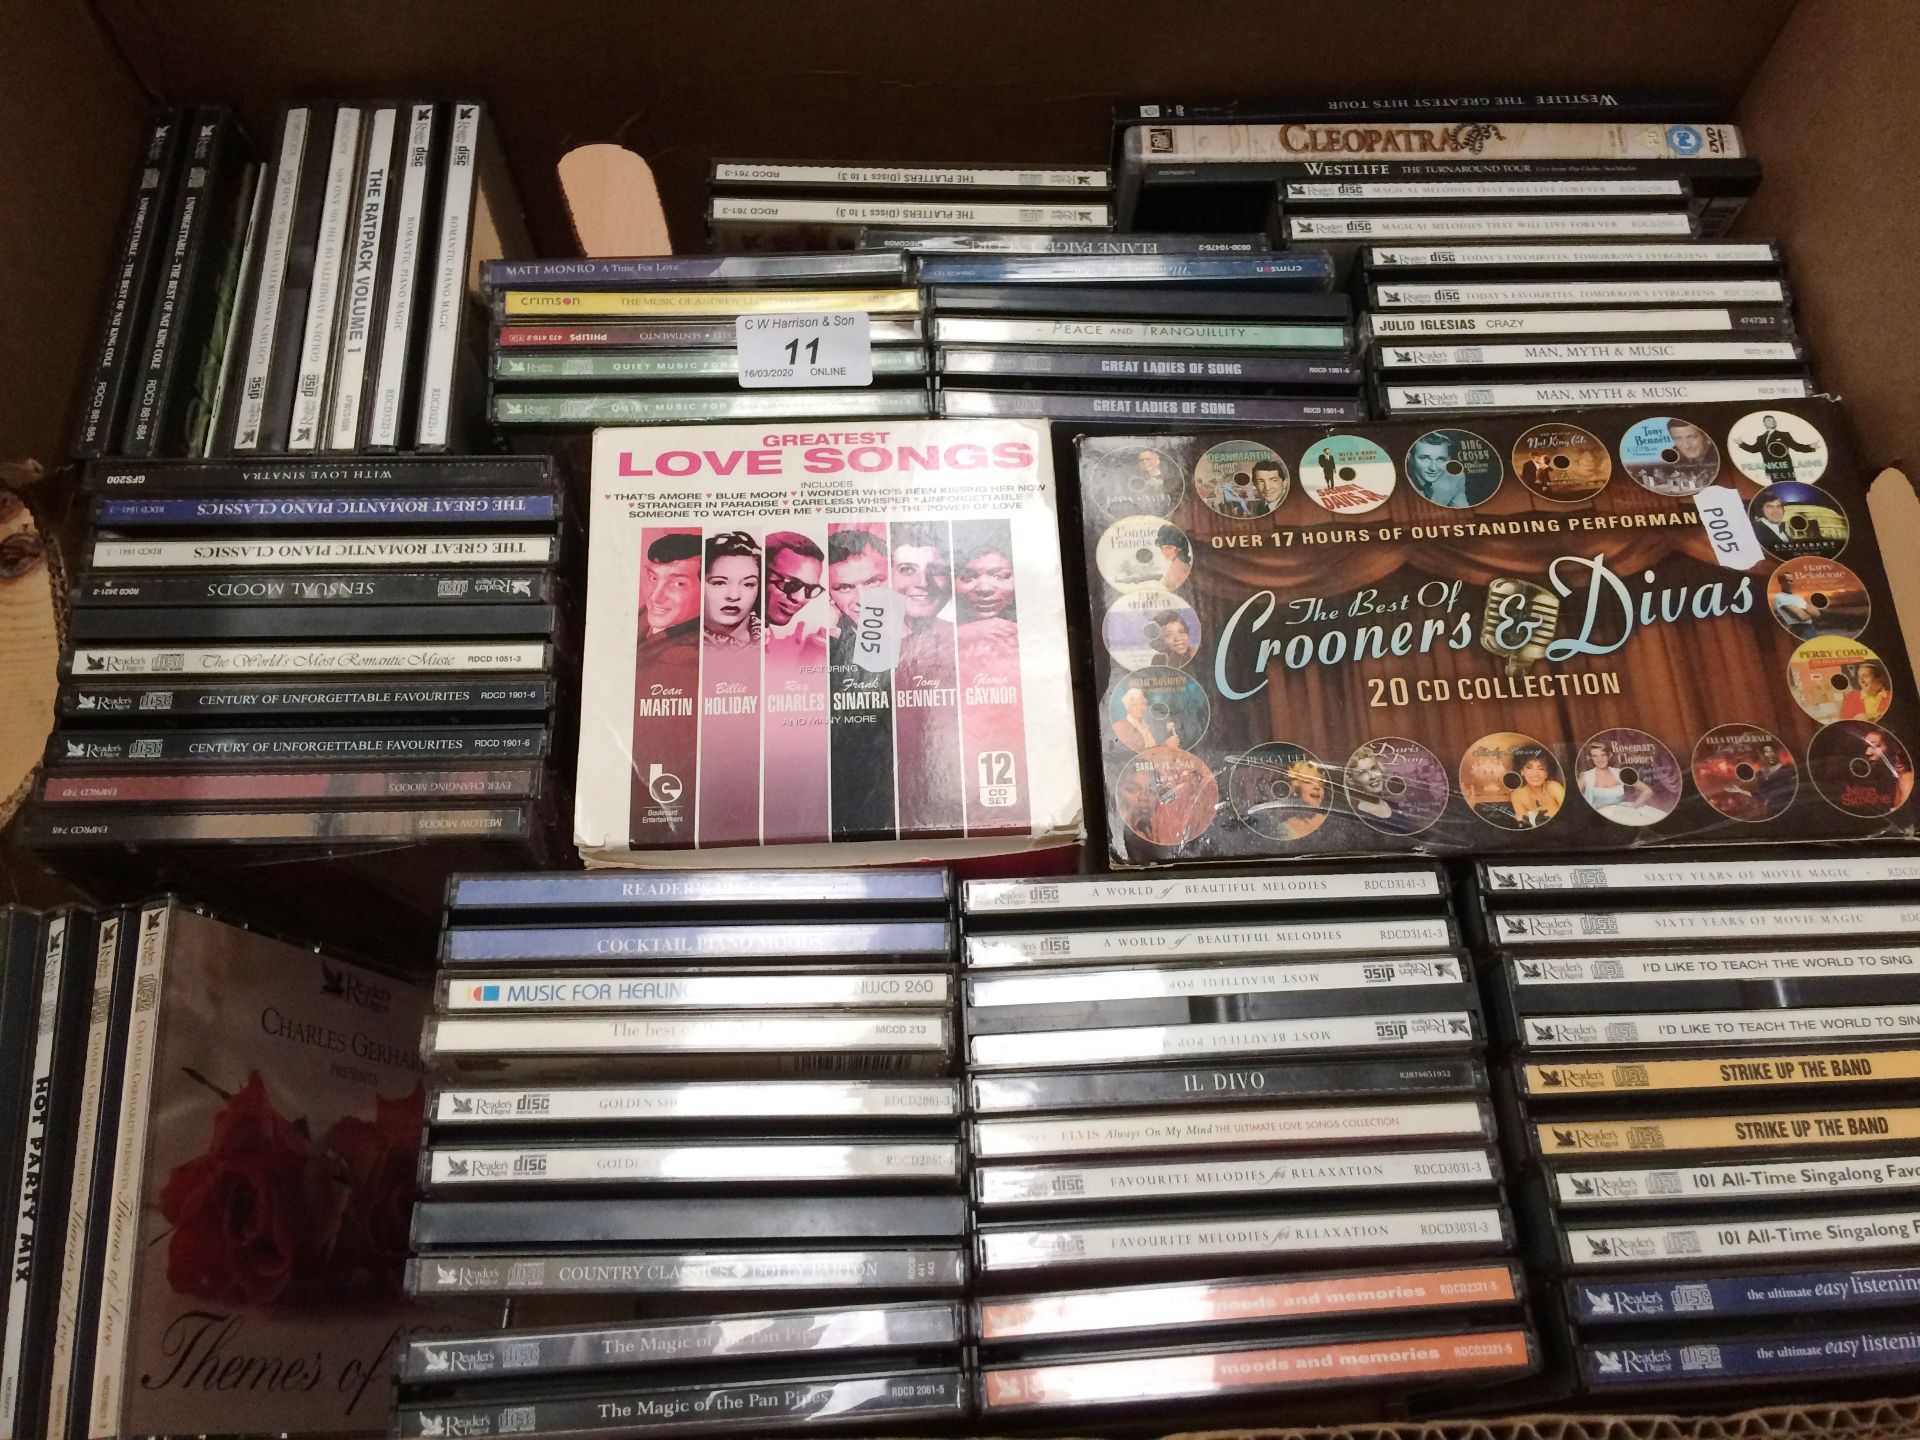 Contents to box - 2 boxed CD sets - The Best of Crooners and Divas and Greatest Love Songs and 45